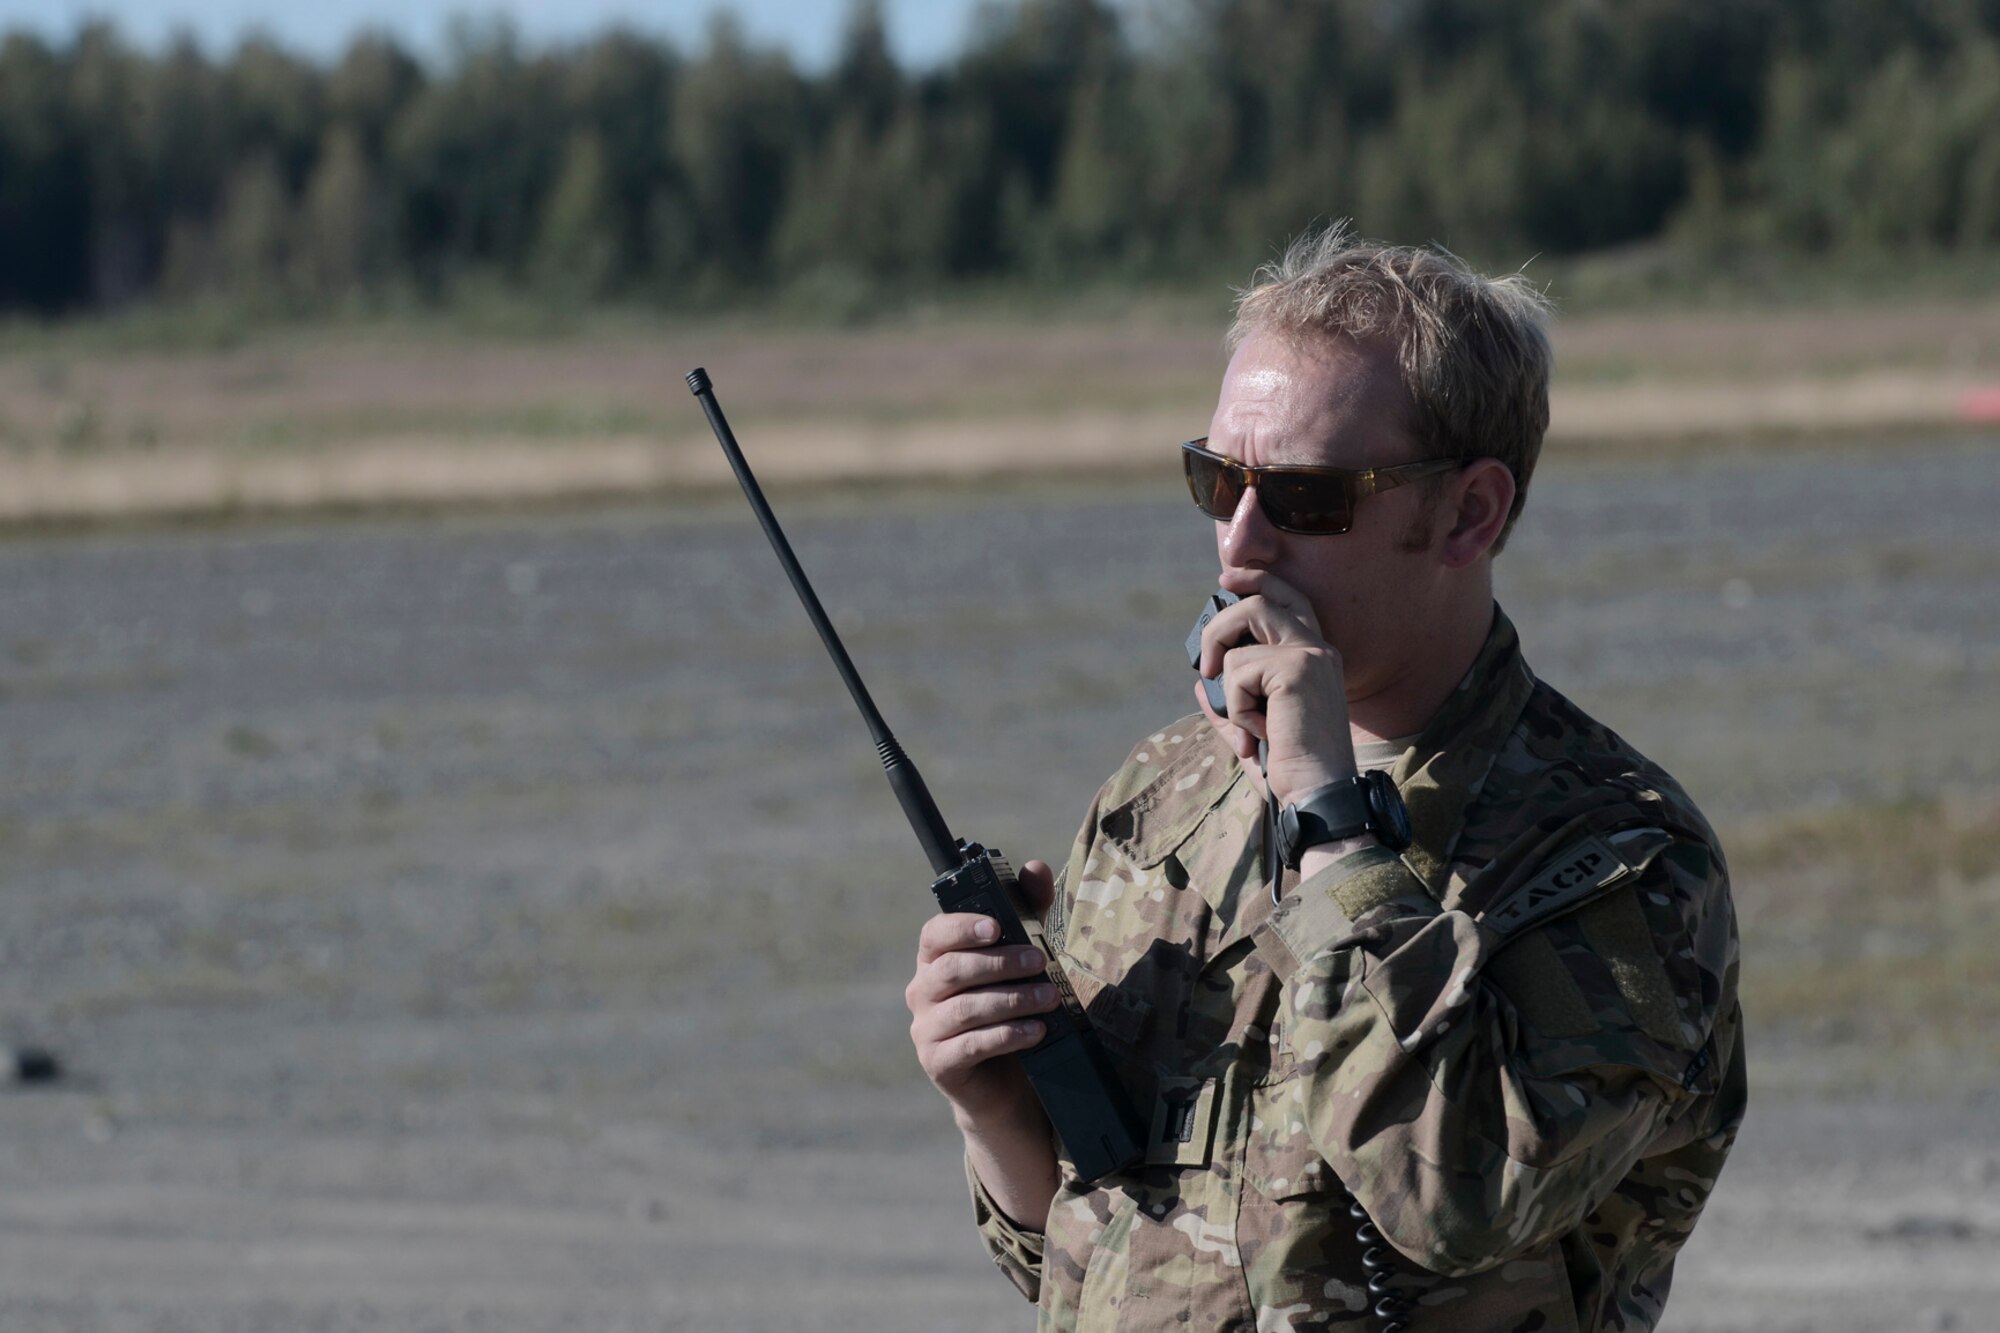 U.S. Air Force Capt. Michael Spanogle, 3rd Air Support Operations Squadron air mobility liaison officer, communicates with aircrew flying overhead a landing zone during RED FLAG-Alaska at Joint Base Elmendorf-Richardson, Alaska, Aug. 14, 2015. The training allowed C-130 aircrew to practice austere landings and take offs, combat offloads and supply drops, but also allowed friendly competition between participating Air Forces: U.S. Air Force, Japan Air Self-Defense Force, Royal Air Force, Royal Australian Air Force, Royal New Zealand Air Force and Royal Thai Air Force. Seasoned C-130 aircrew from each country judged the training exercises from the ground, allotting points based off predetermined timing and accuracy requirements. (U.S. Air Force photo by Staff Sgt. Cody H. Ramirez/Released)